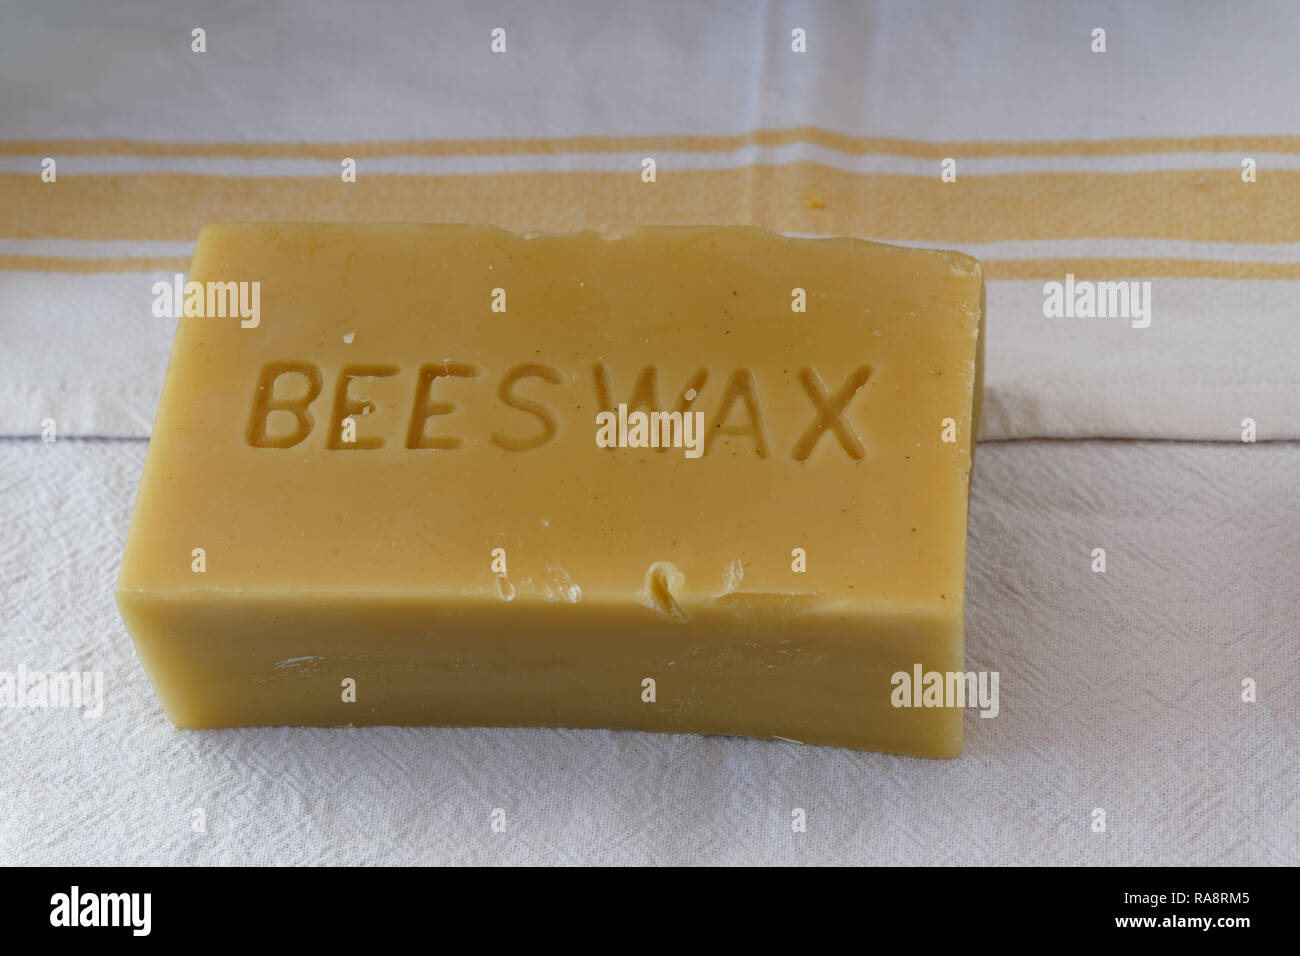 bar of golden beeswax sitting on a white kitchen towel with yellow stripes Stock Photo